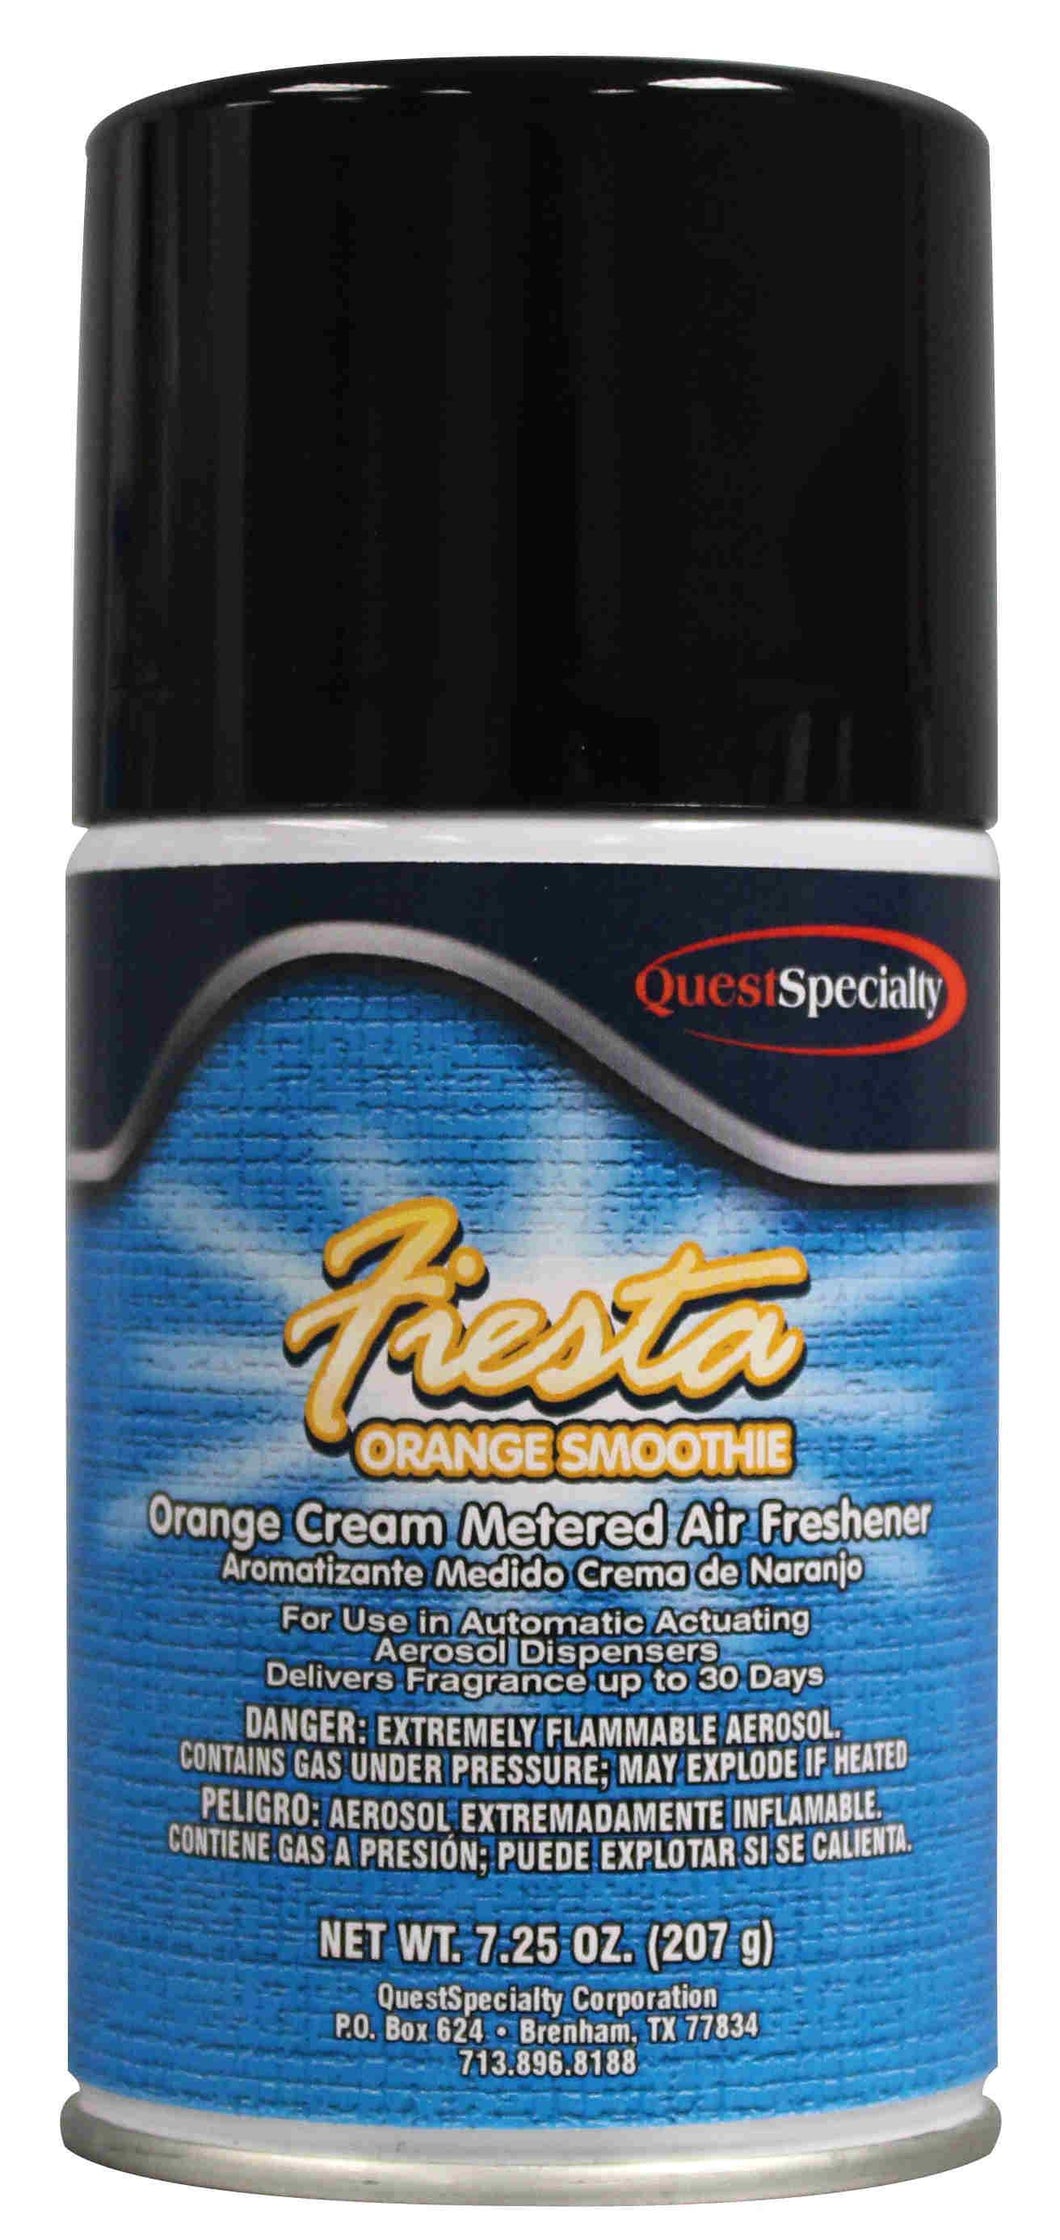 Automatic Air Freshener Spray Refill, Fiesta Orange Smoothie, 7.25 oz Can, QuestSpecialty, Pack of 12